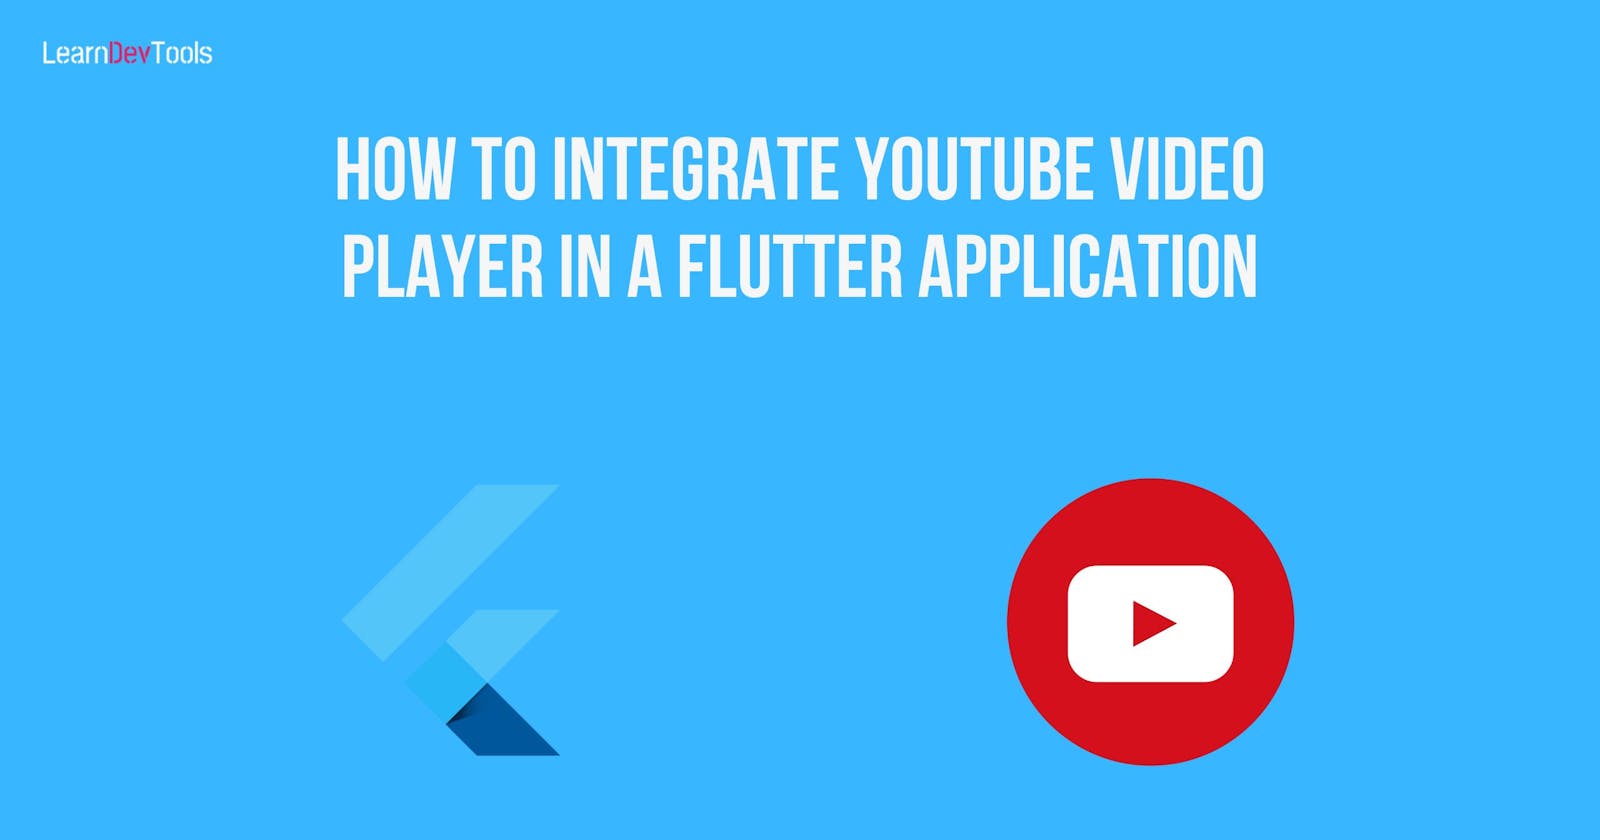 How to Integrate YouTube Video Player in a Flutter Application